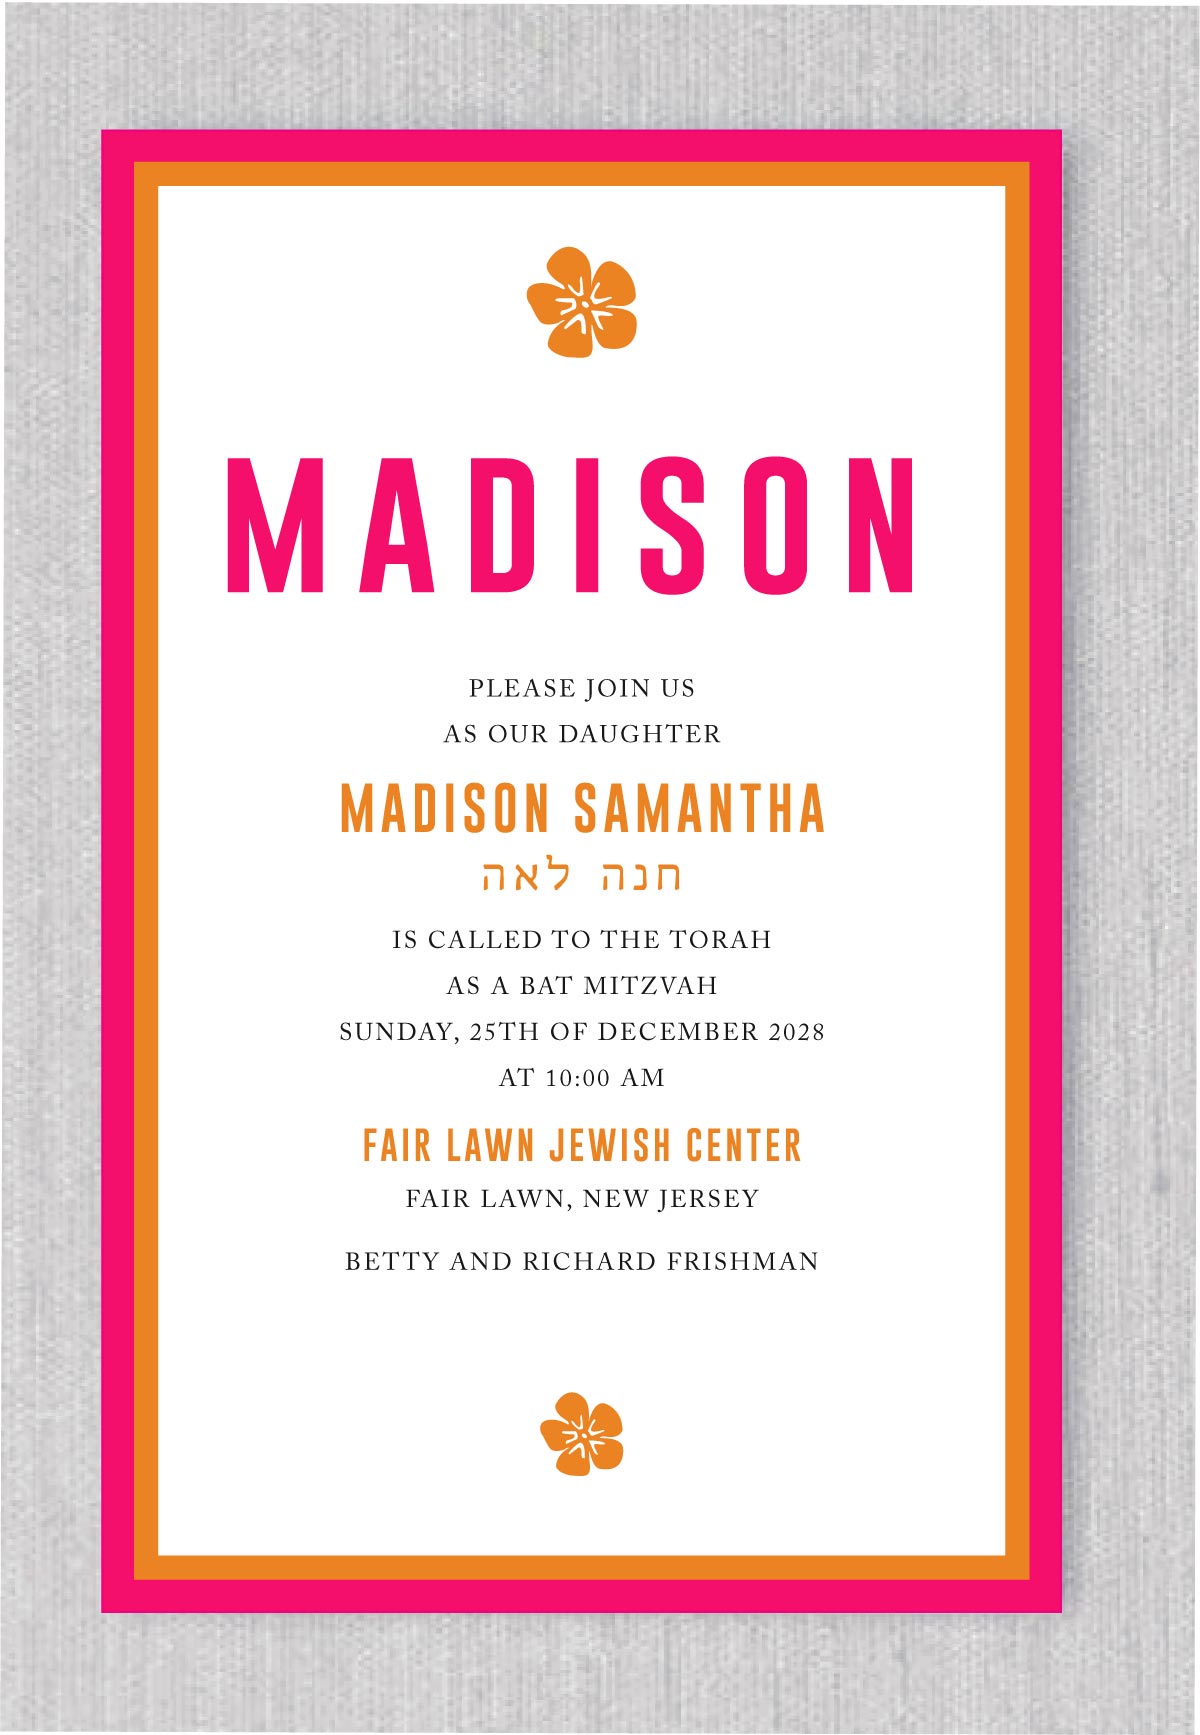 This bat mitzvah invitation features a bold and vibrant color scheme of hot pink and orange, with a contemporary, modern design and style. The layout is unique and eye-catching, sure to make a lasting impression on your guests. This invitation is the perfect choice for anyone looking for a fresh and stylish way to invite their family and friends to celebrate this special bat mitzvah occasion.